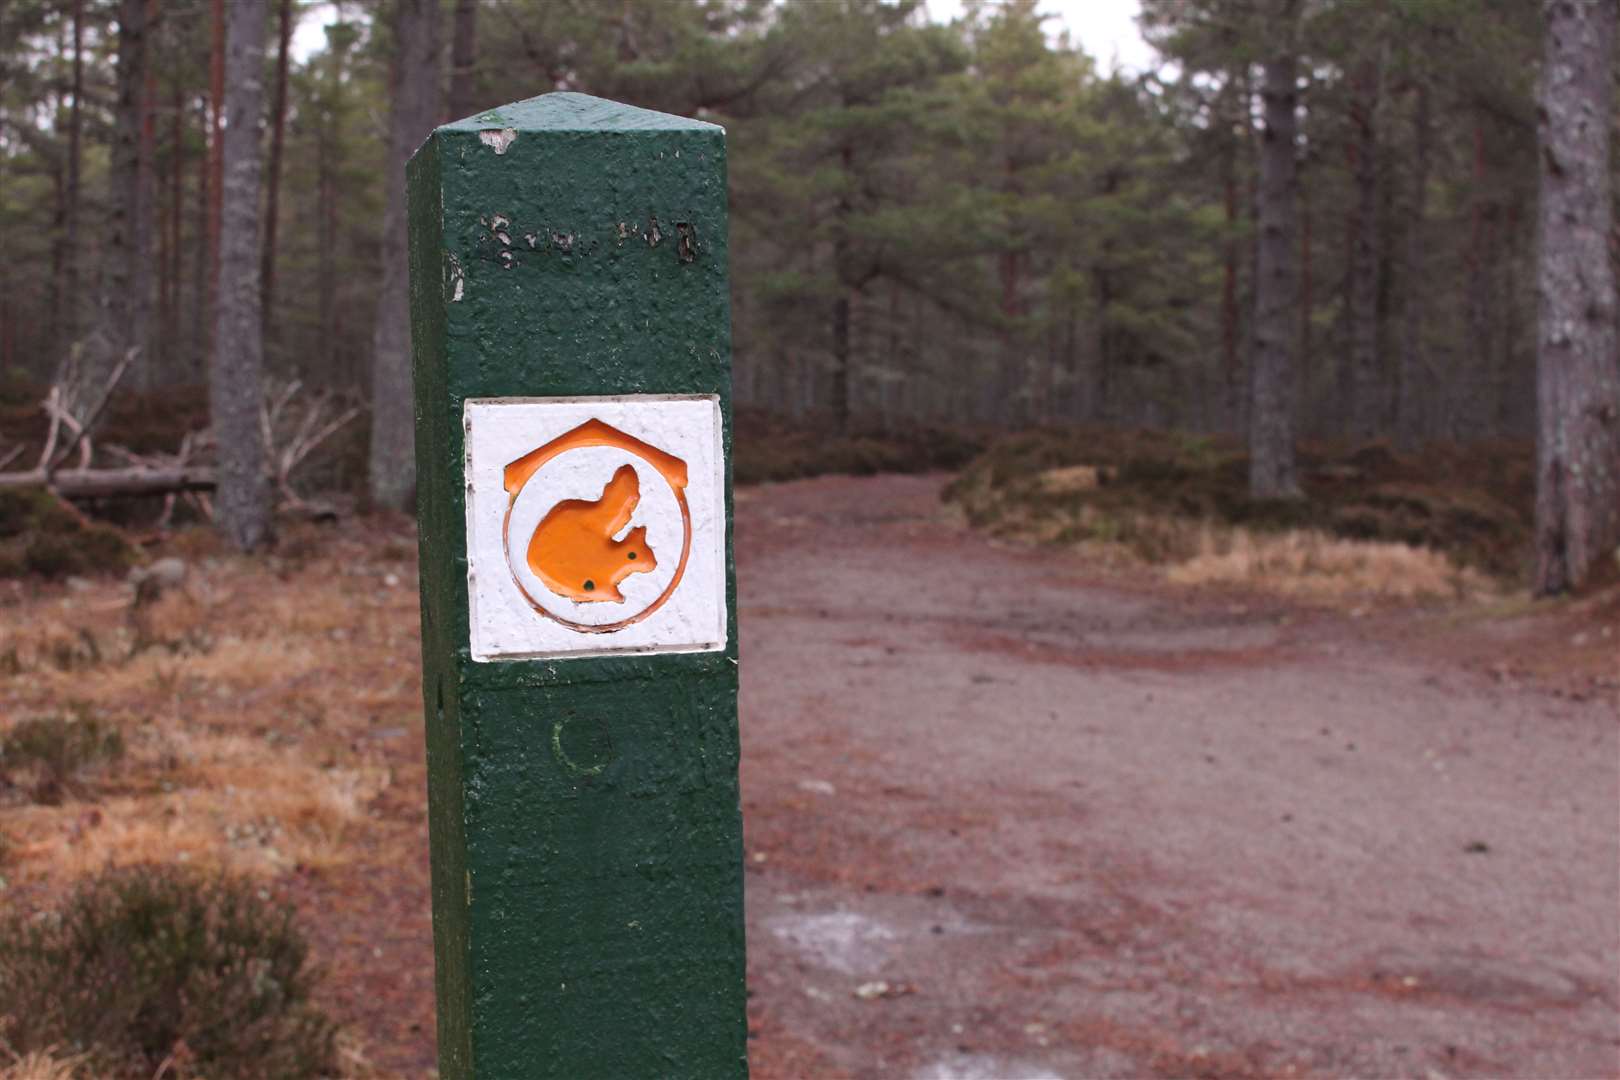 One of the Red Squirrel Trail markers.